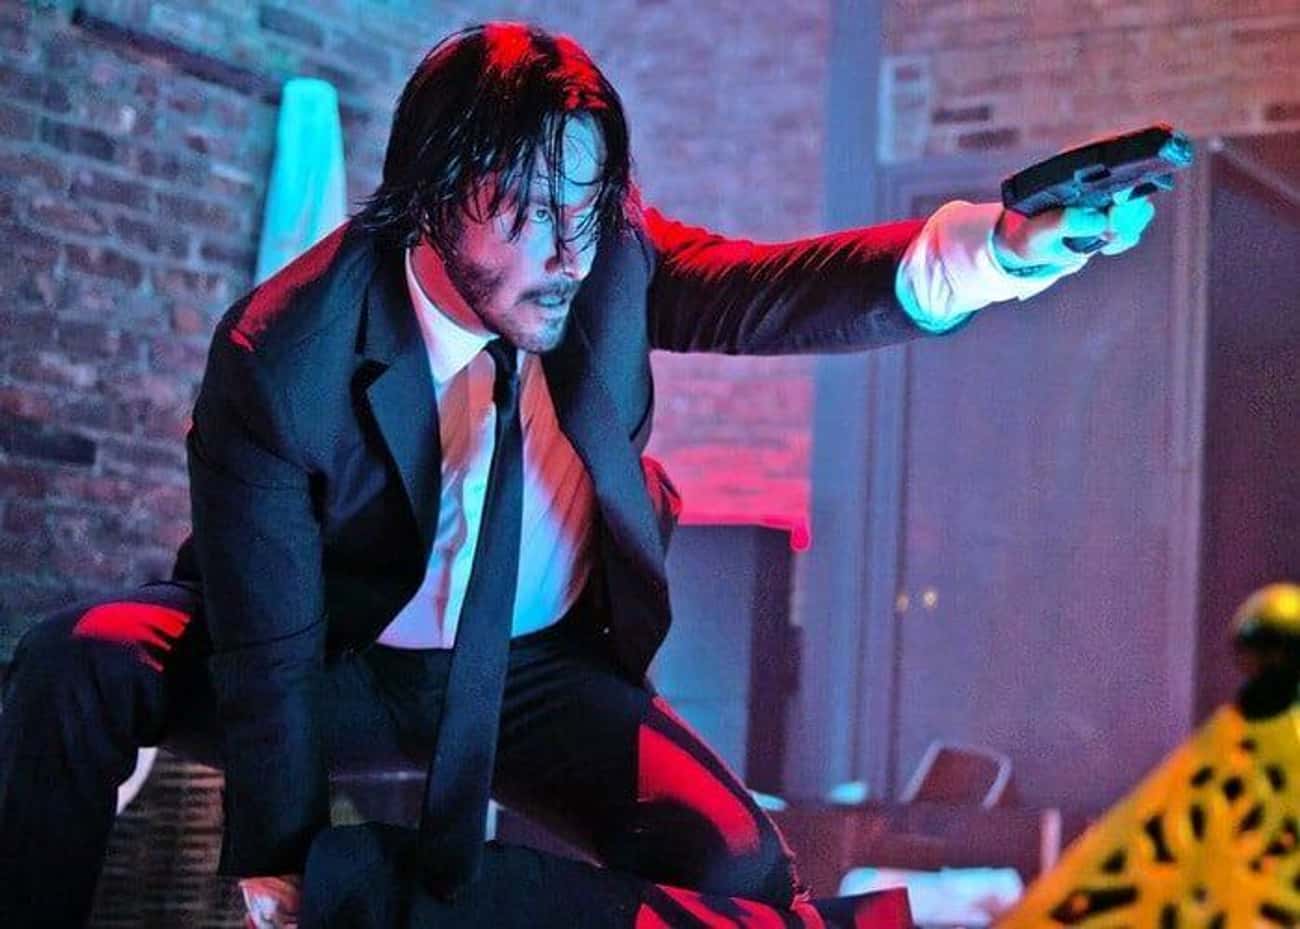 Keanu Reeves Refused To Rest While Filming 'John Wick' - Even When He Had The Flu